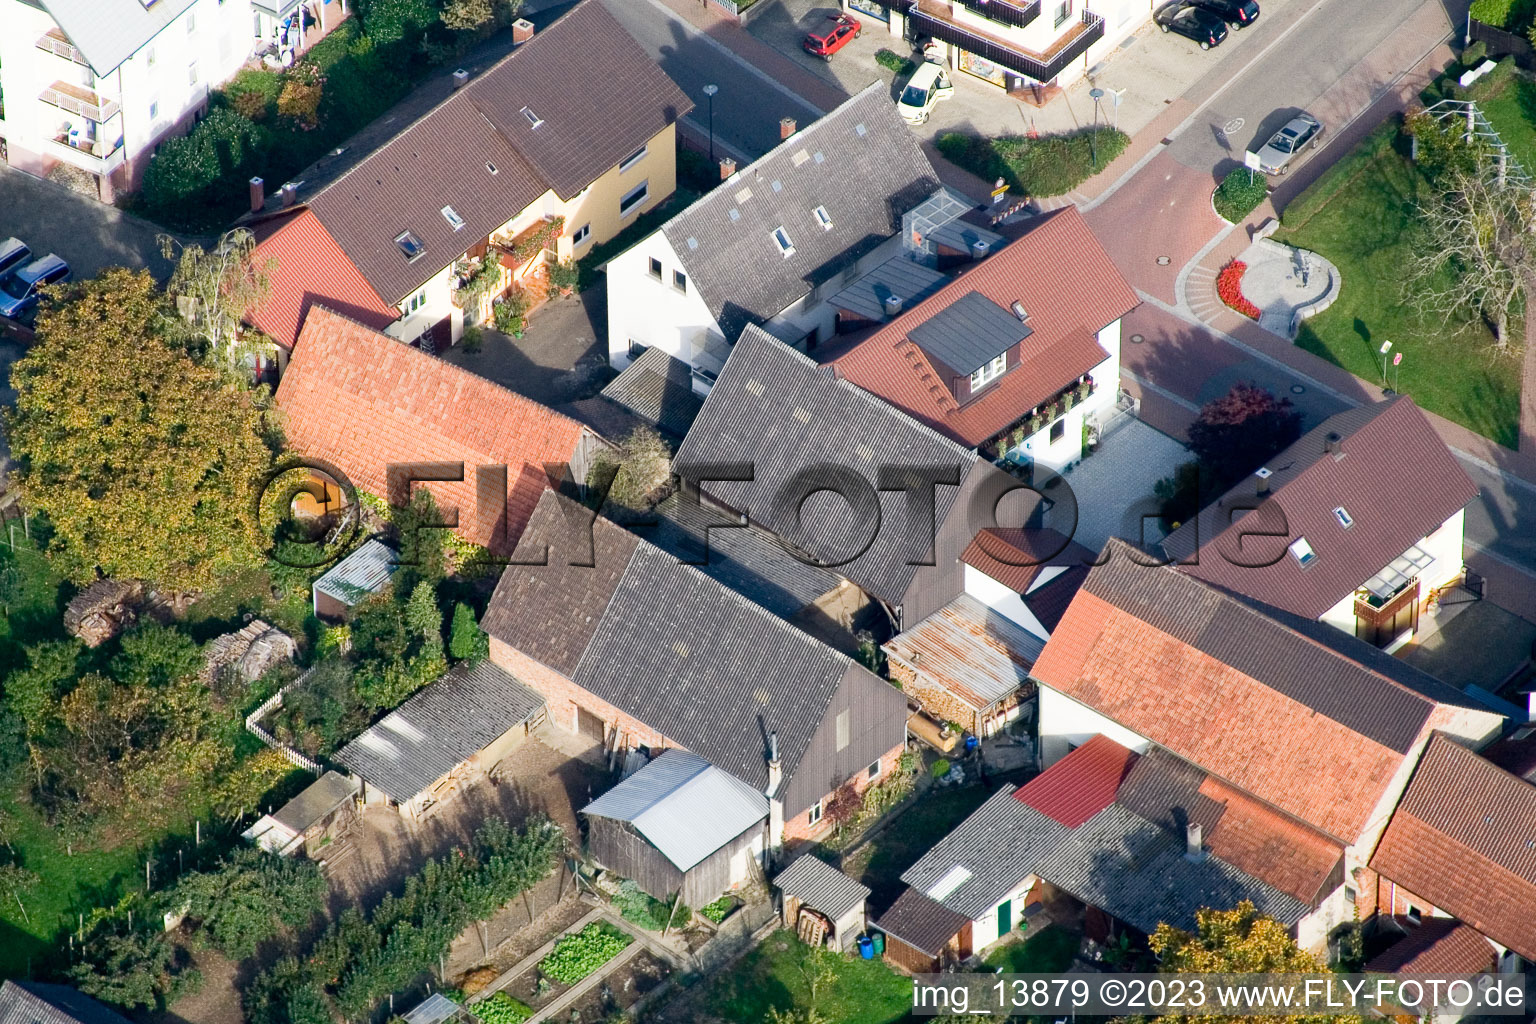 District Urloffen in Appenweier in the state Baden-Wuerttemberg, Germany seen from above